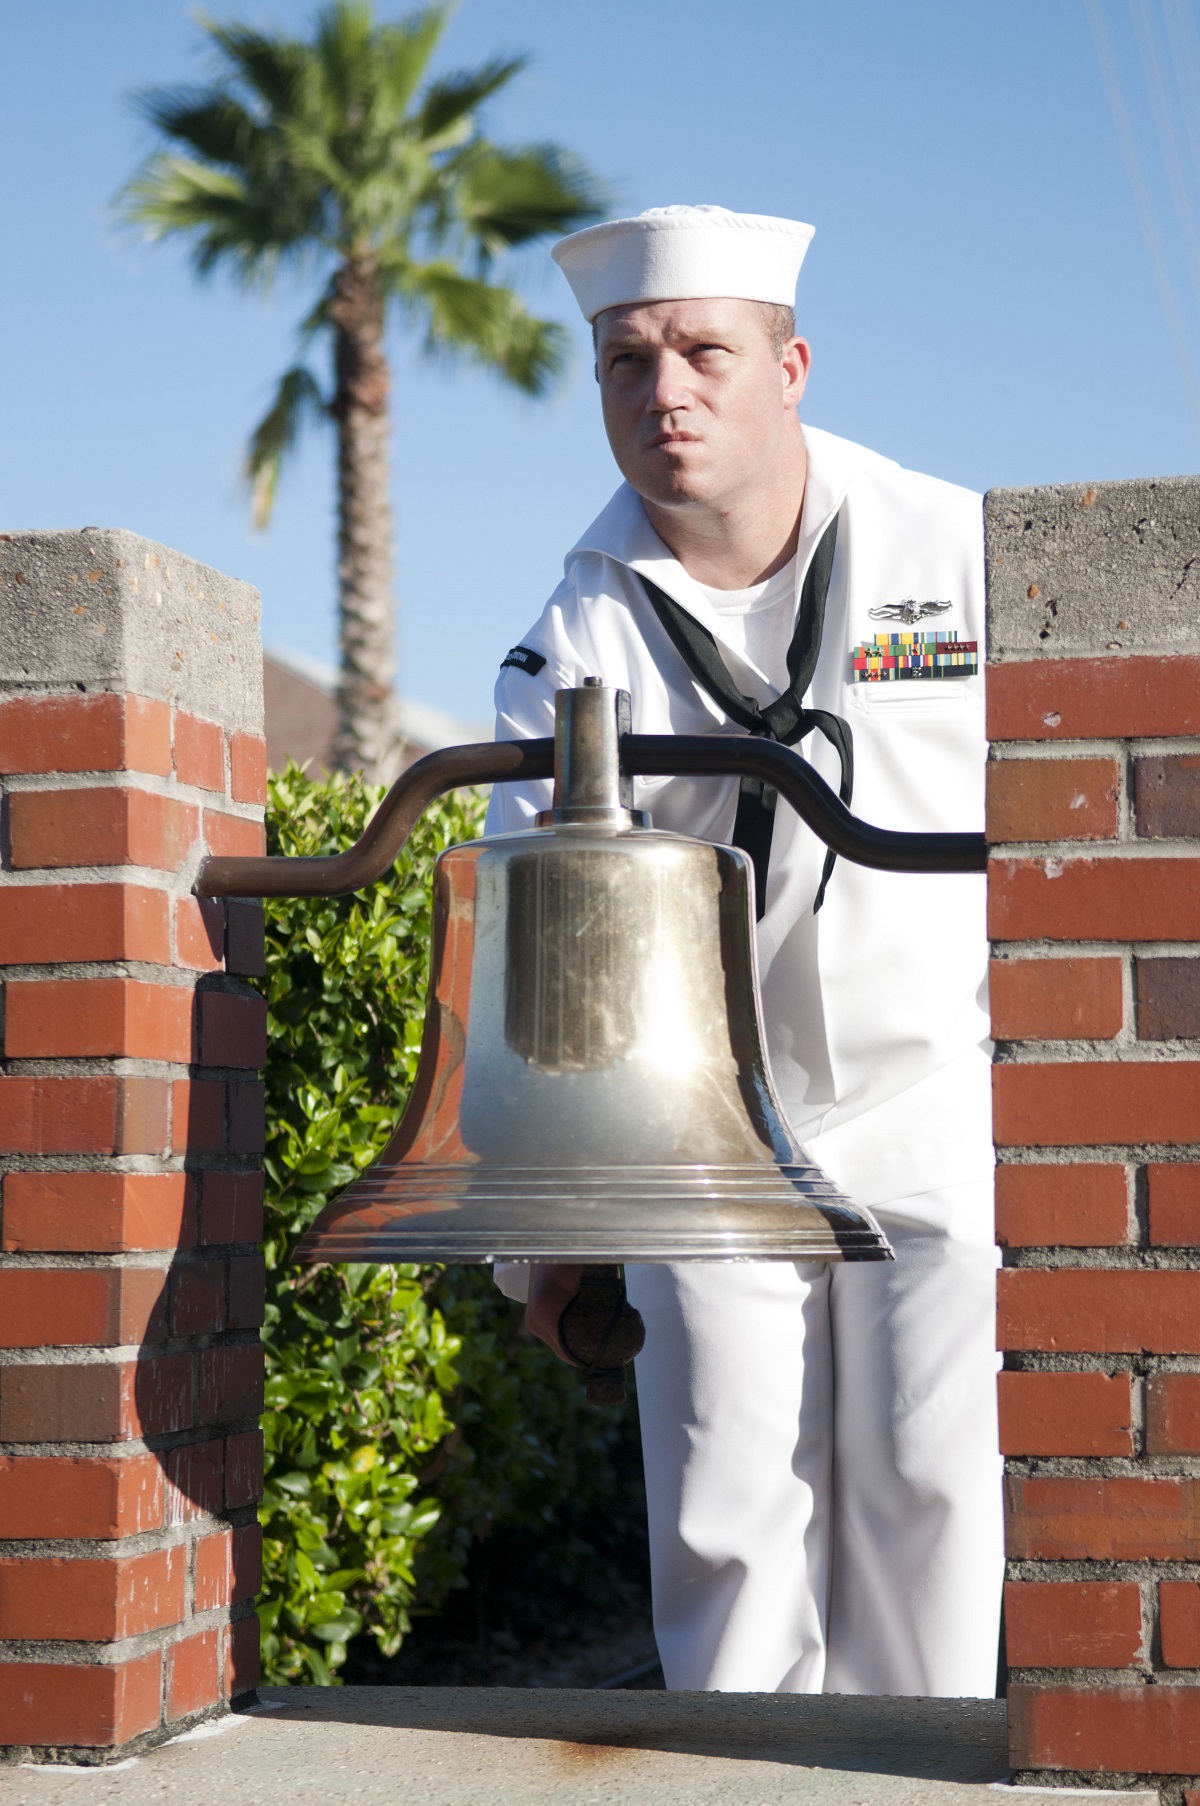 PENSACOLA, Fla. (Sept. 9, 2016) Chief (select) Cryptologic Technician (Collection) Lance Burney strikes a bell during a Sept. 11 remembrance ceremony at Naval Air Station Pensacola's Corry Station. U.S. Navy photo by Mass Communication Specialist 3rd Class Taylor L. Jackson/Released 